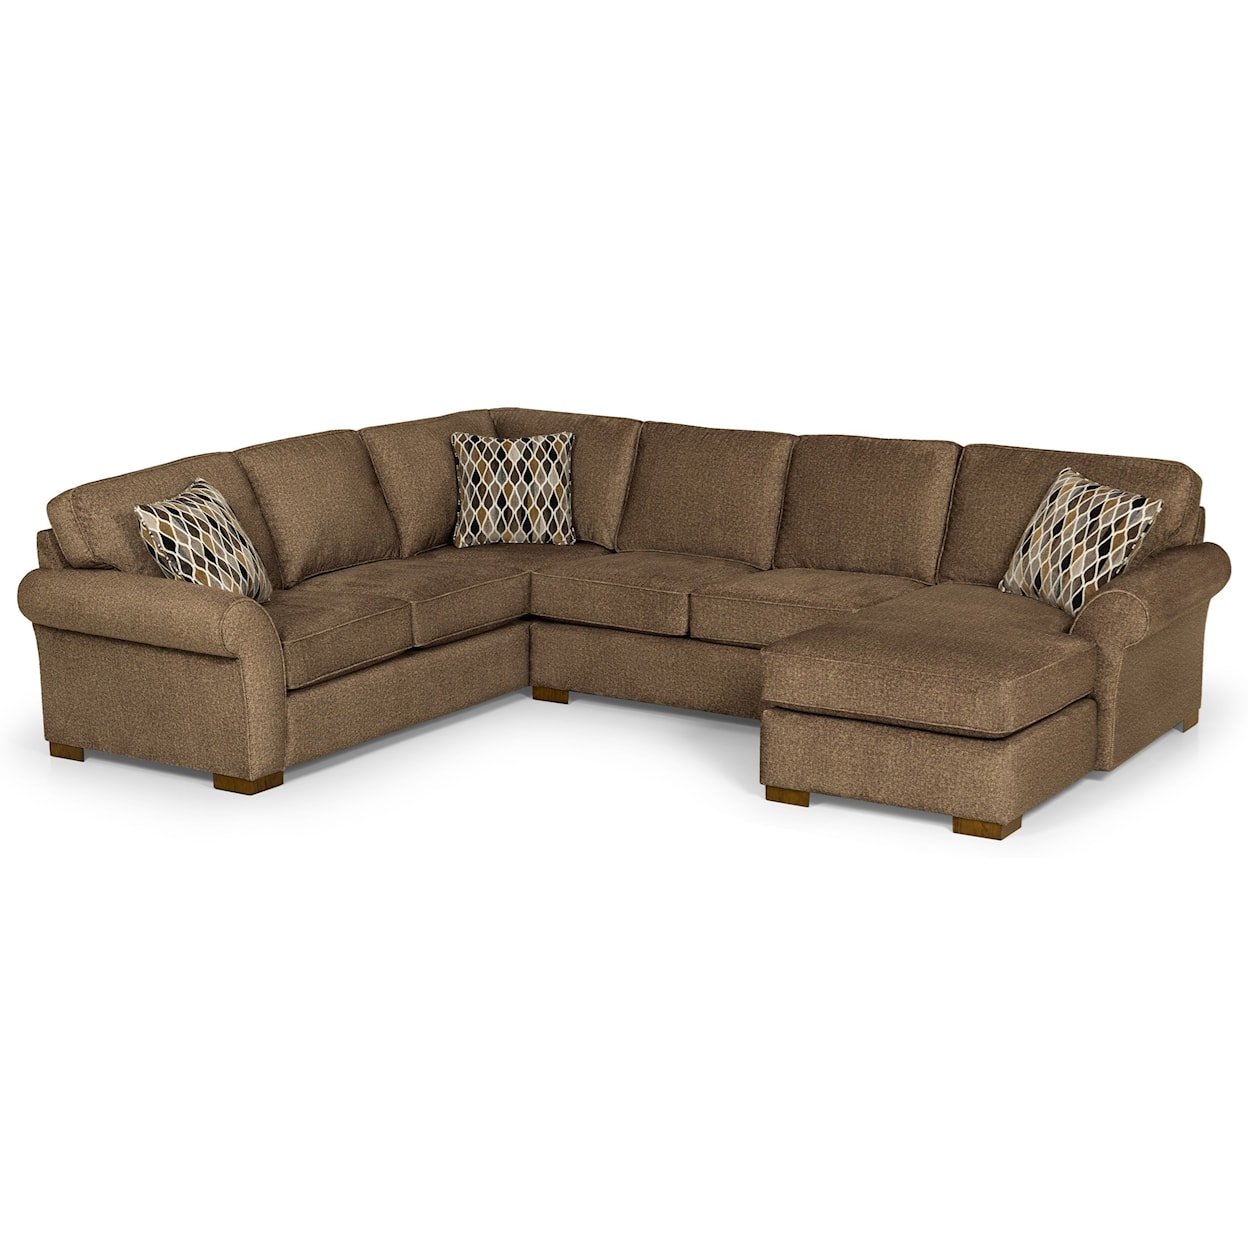 Stanton 551 5-Seat Sectional Sofa w/ RAF Chaise